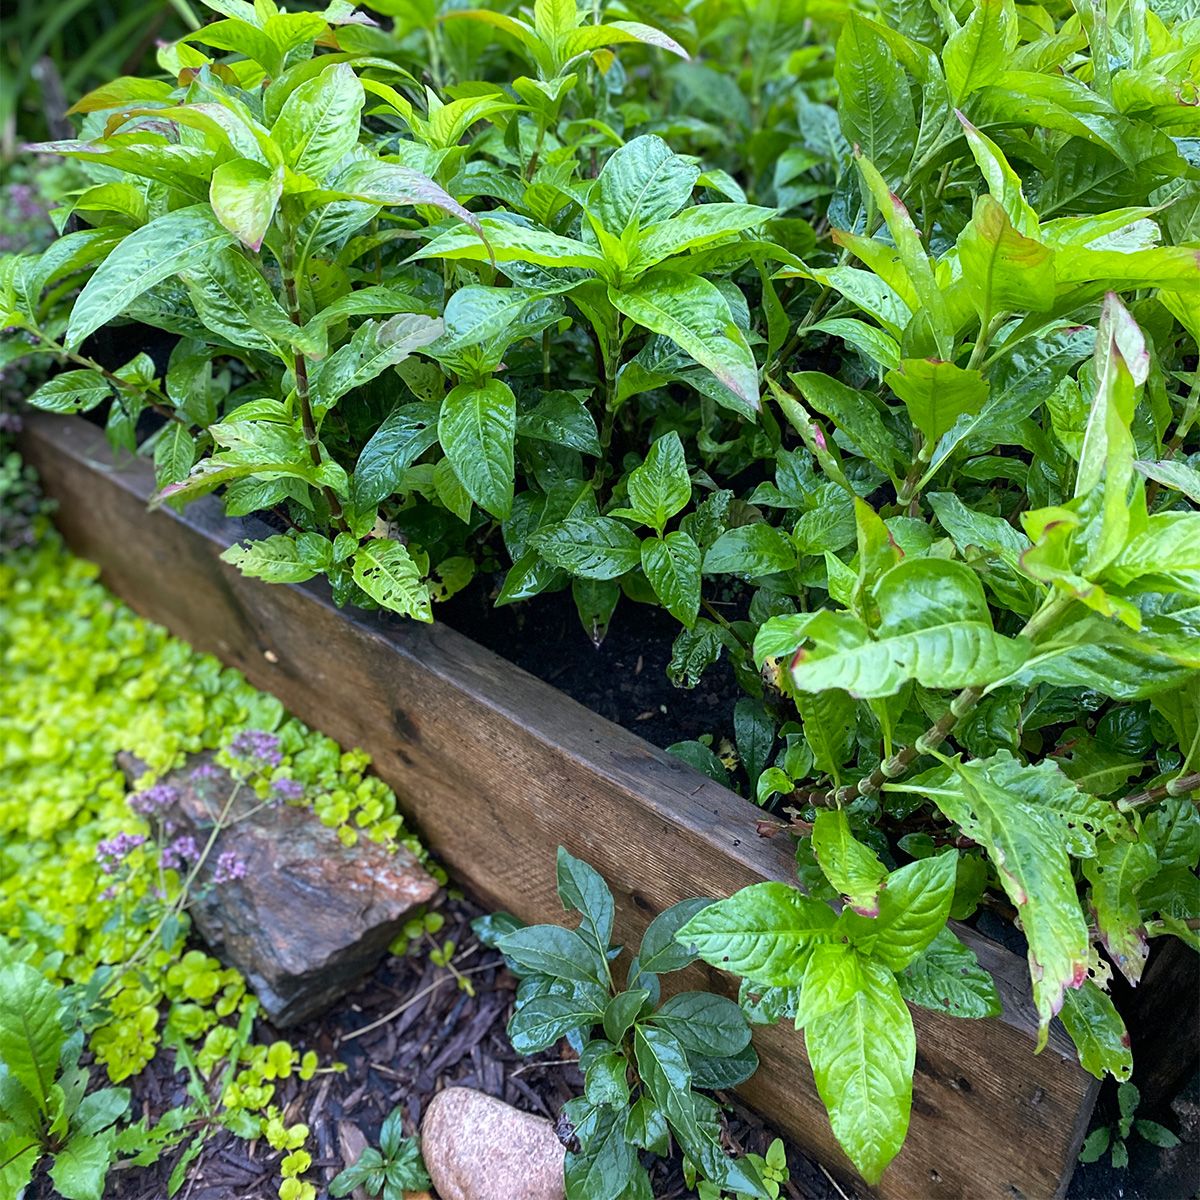 Indigo plants in a raised garden bed, wet from rainfall